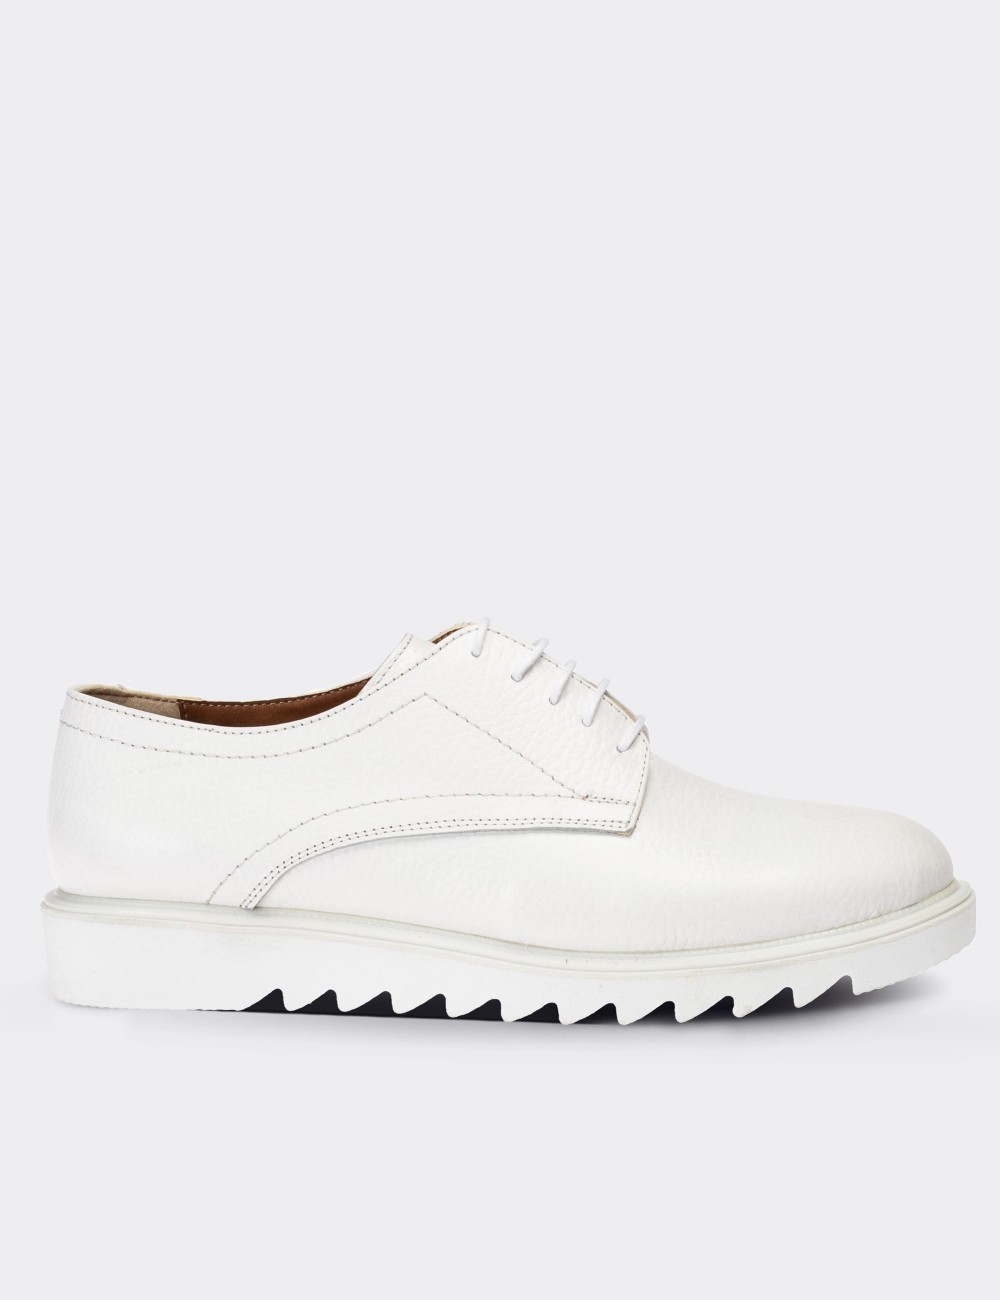 White  Leather Lace-up Shoes - 01430ZBYZP02